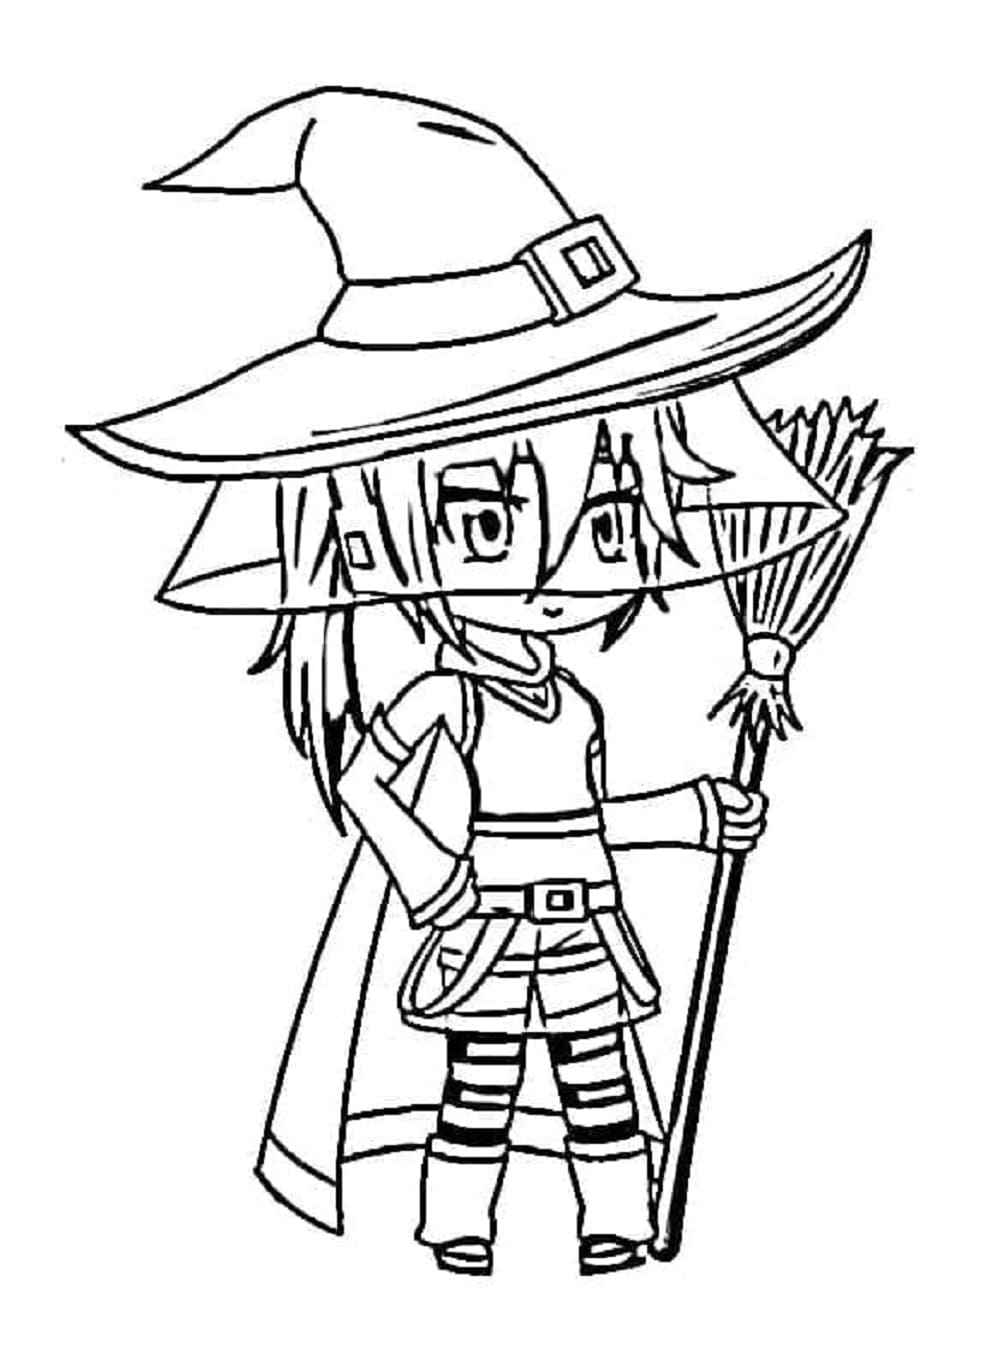 Printable Witch Girl from Gacha Life Coloring Page